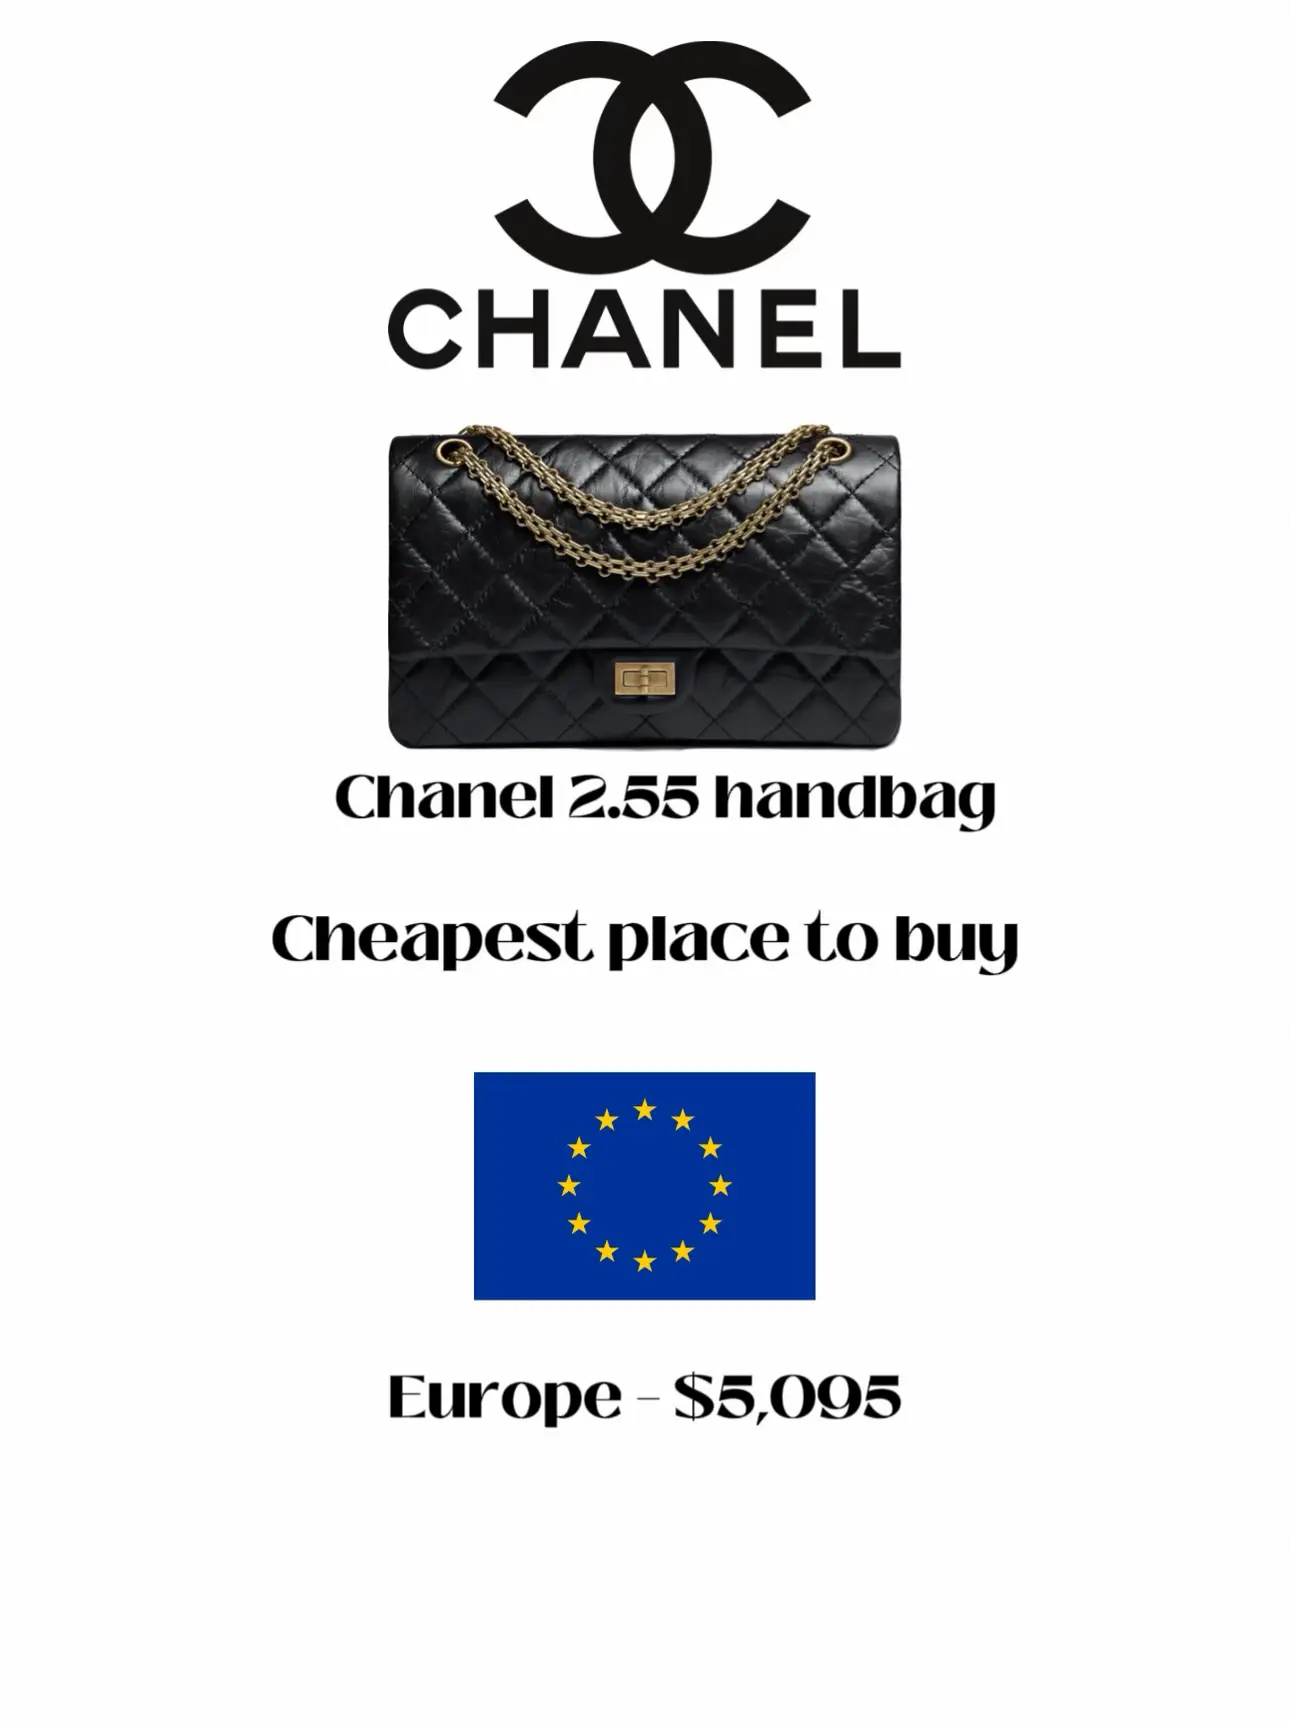 WHICH COUNTRIES HAVE THE CHEAPEST LUXURY BAGS